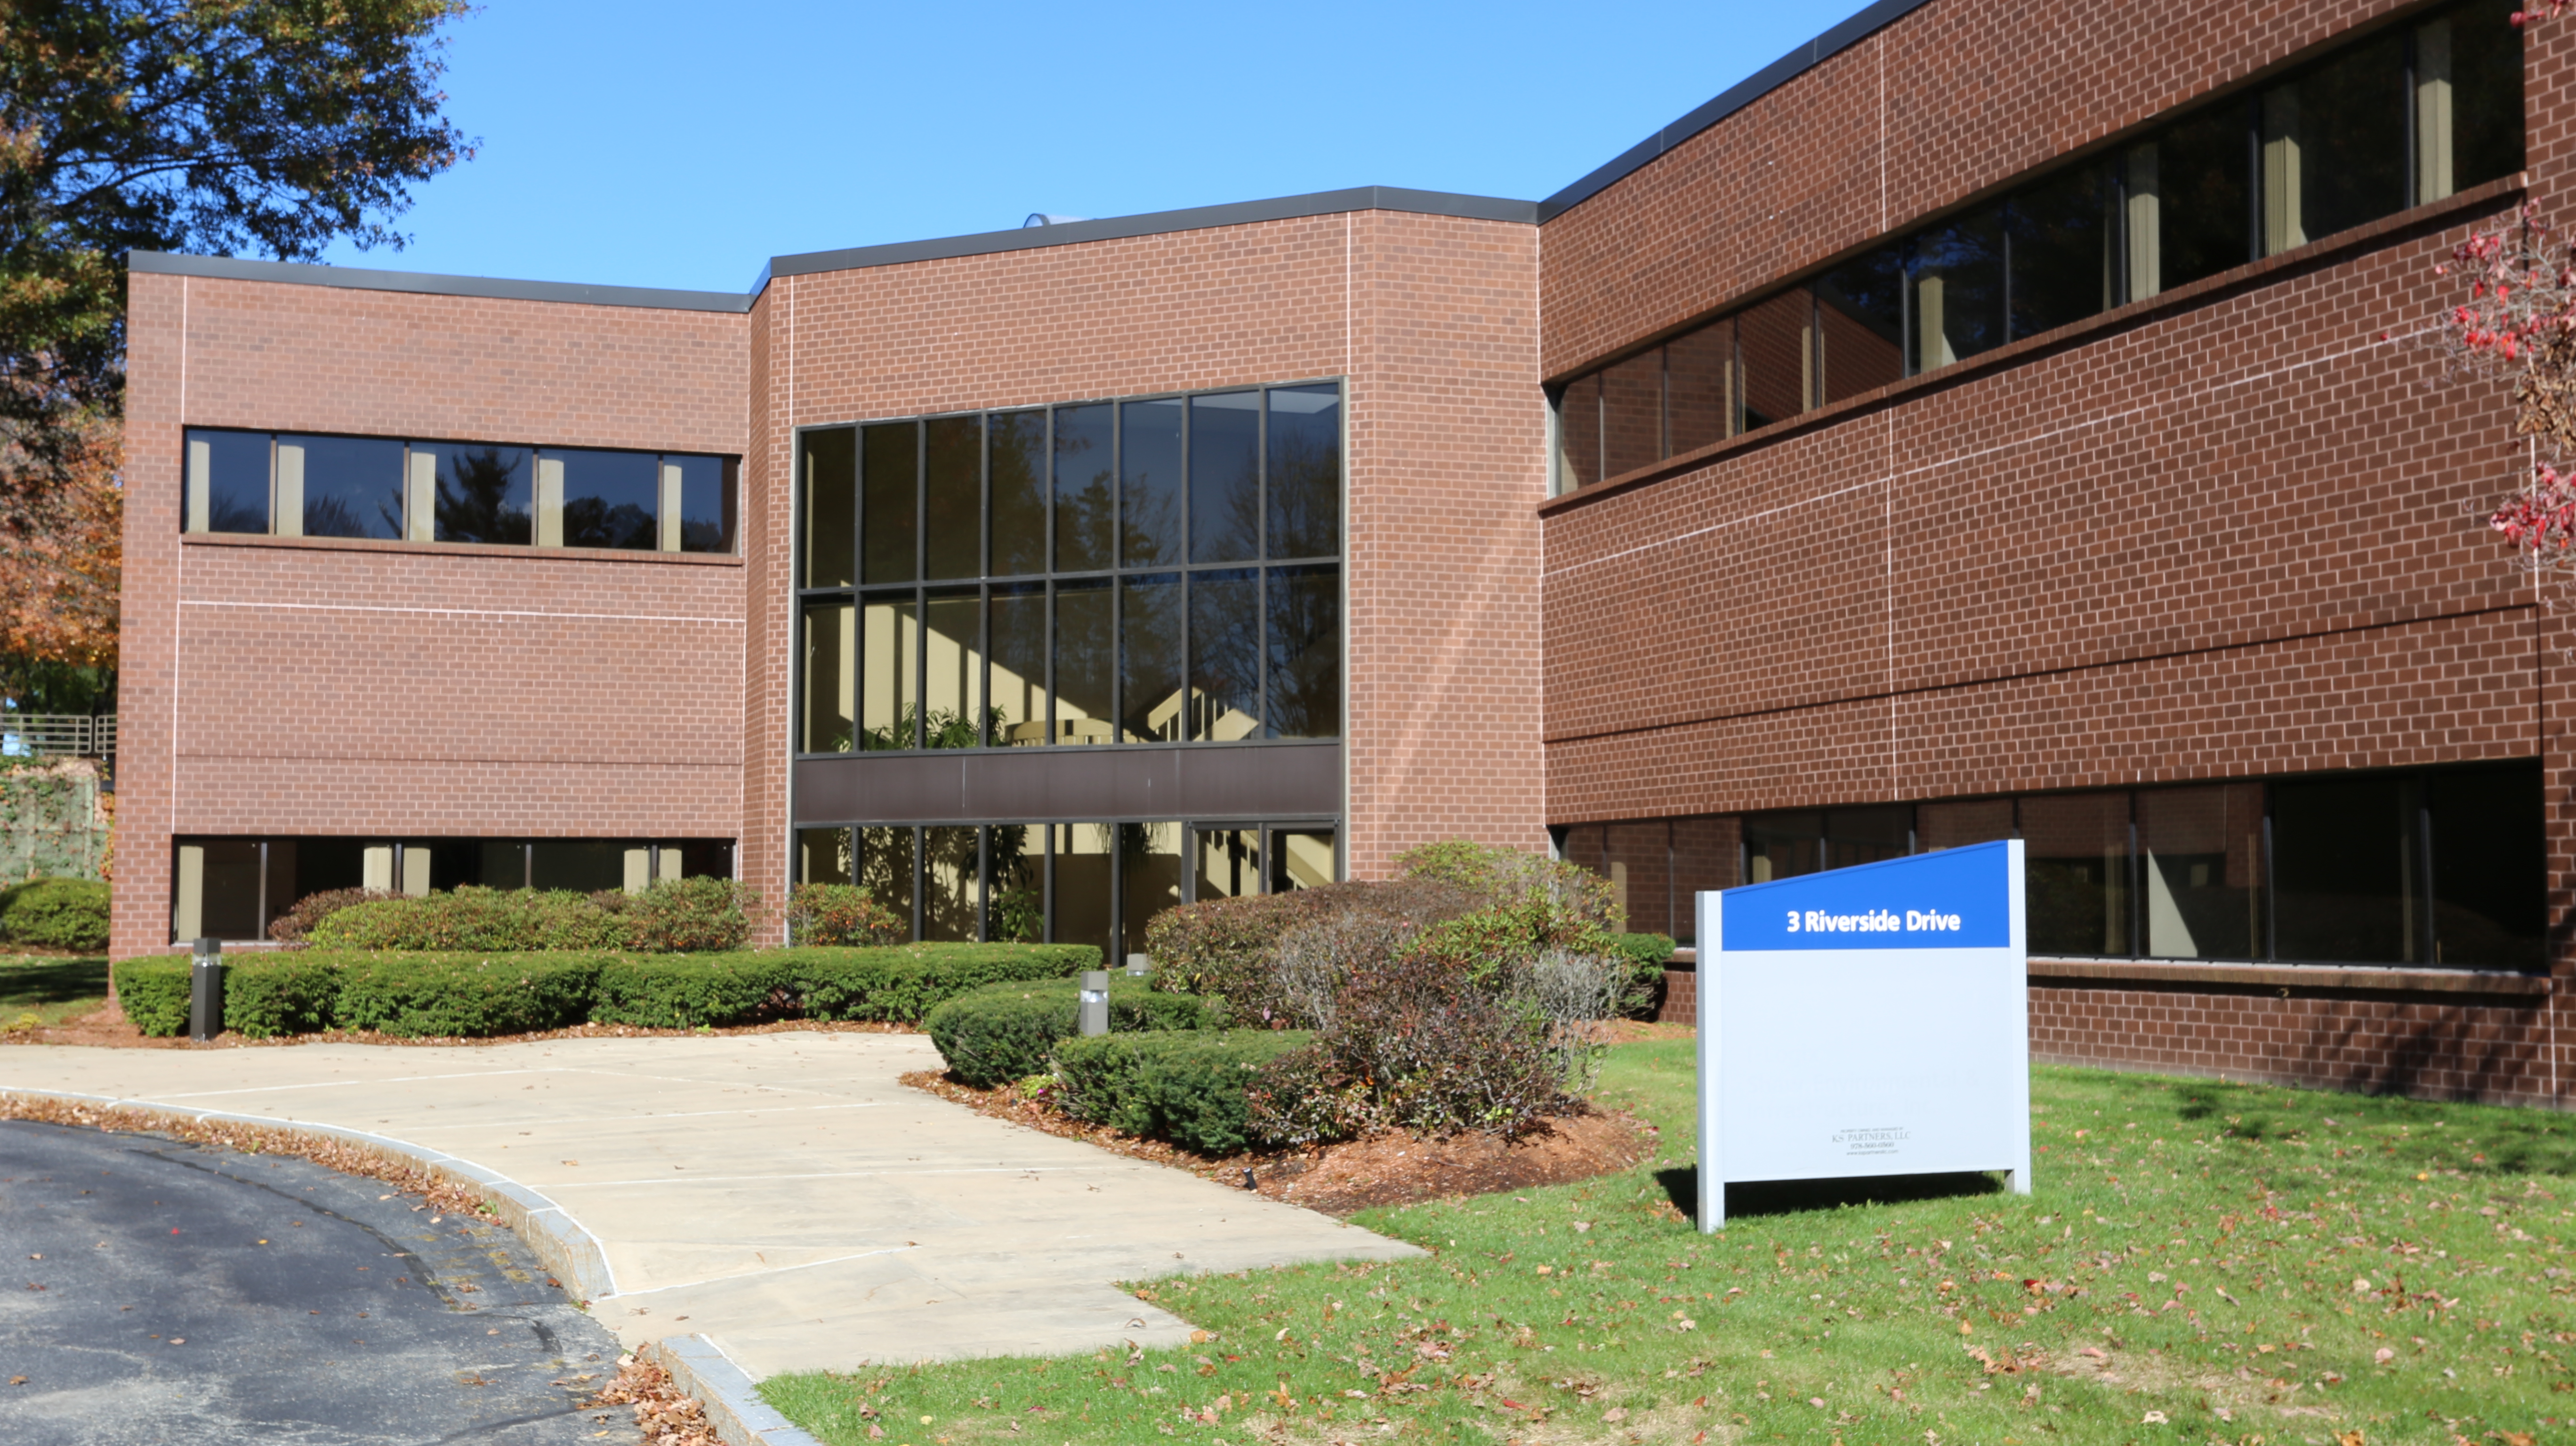 Leasing – 3 Riverside Dr., Andover, MA